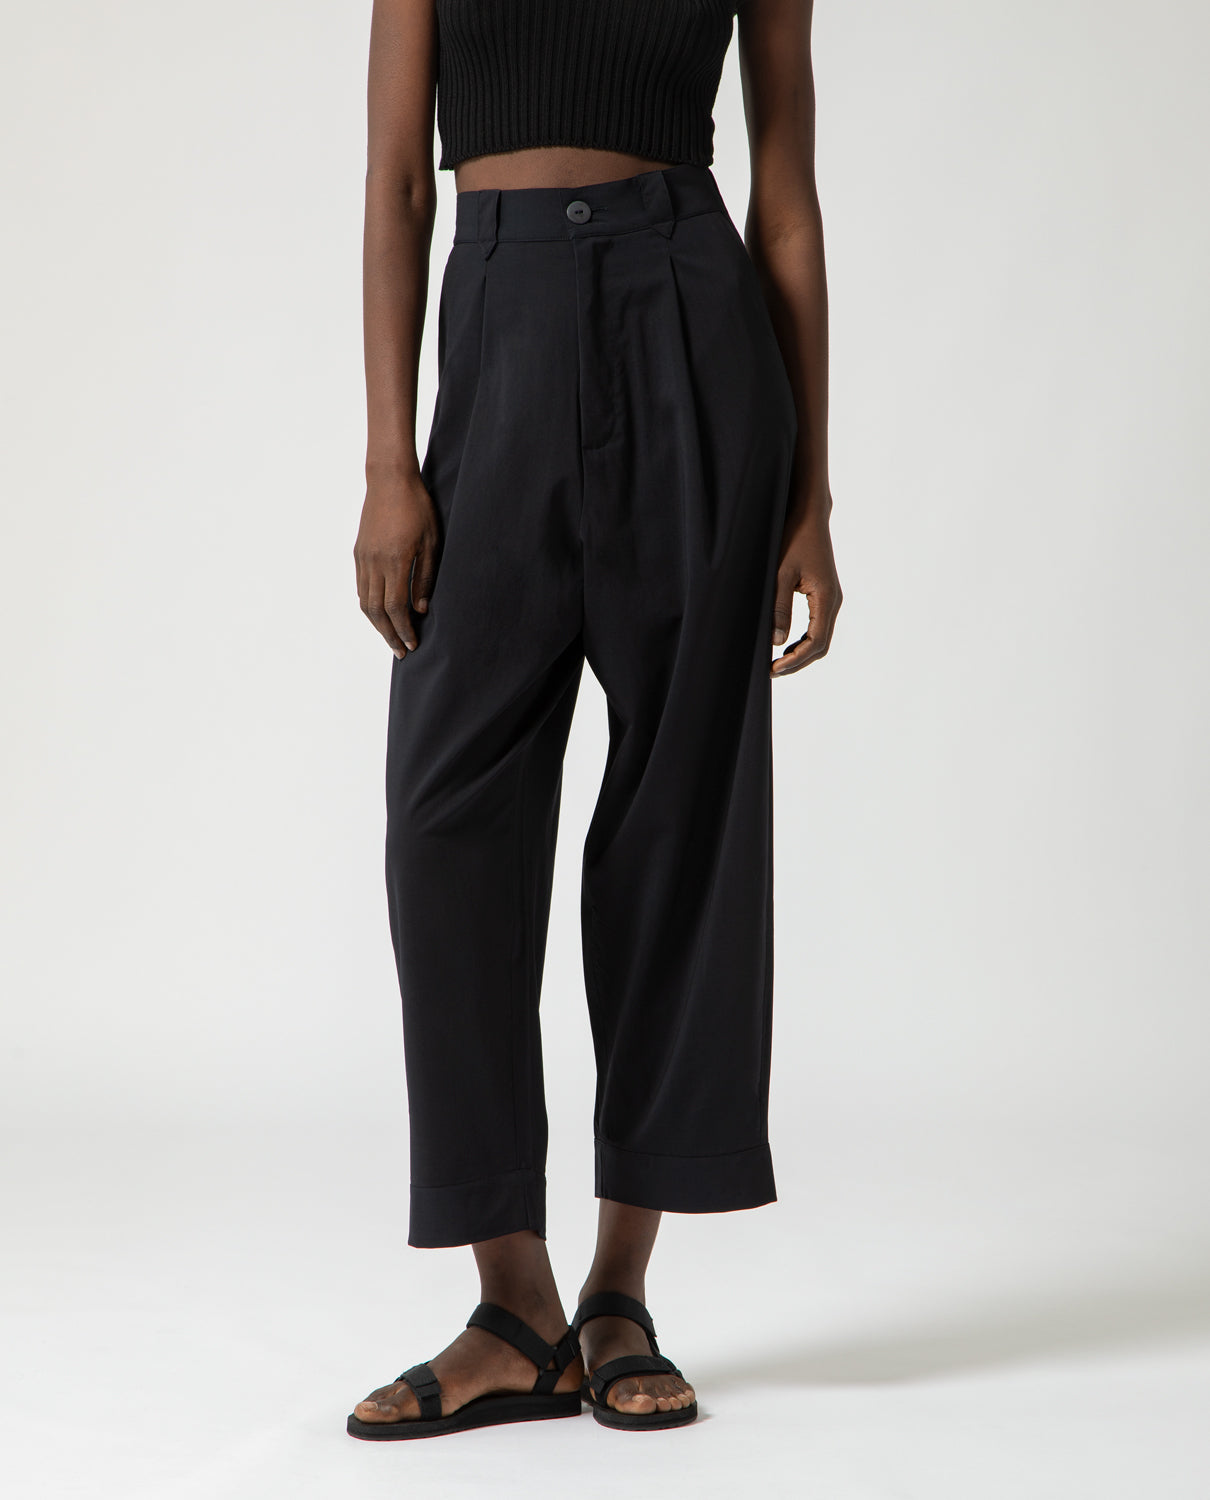 Trousers – Emil